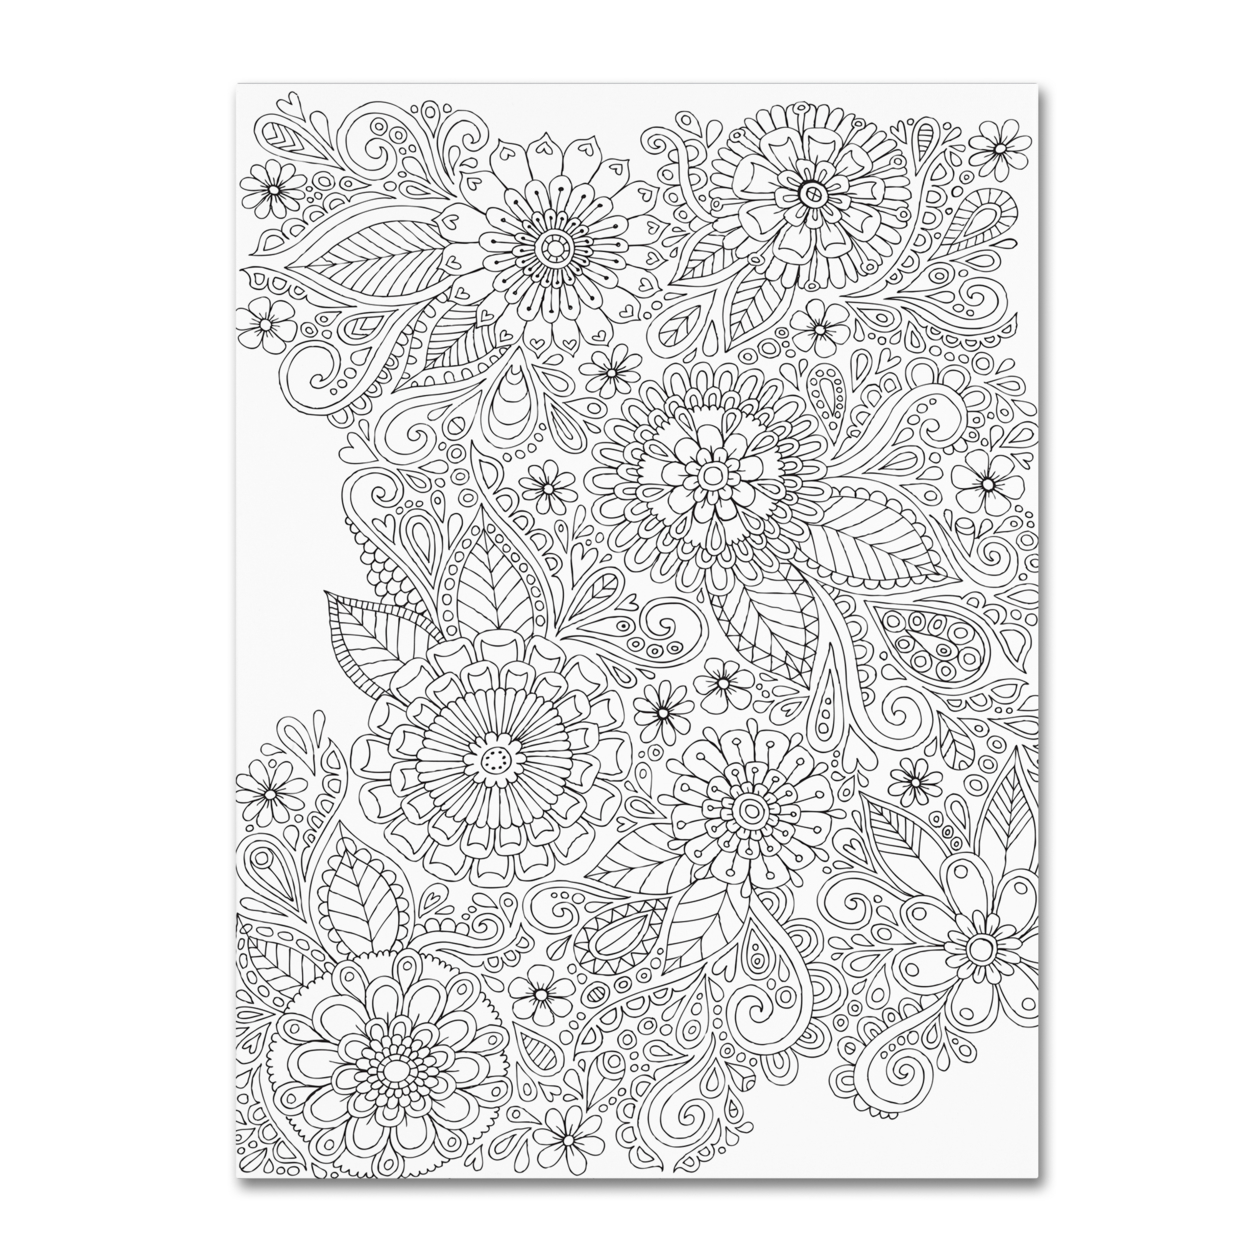 Hello Angel 'Botanical Doodles' Canvas Wall Art 35 X 47 Inches